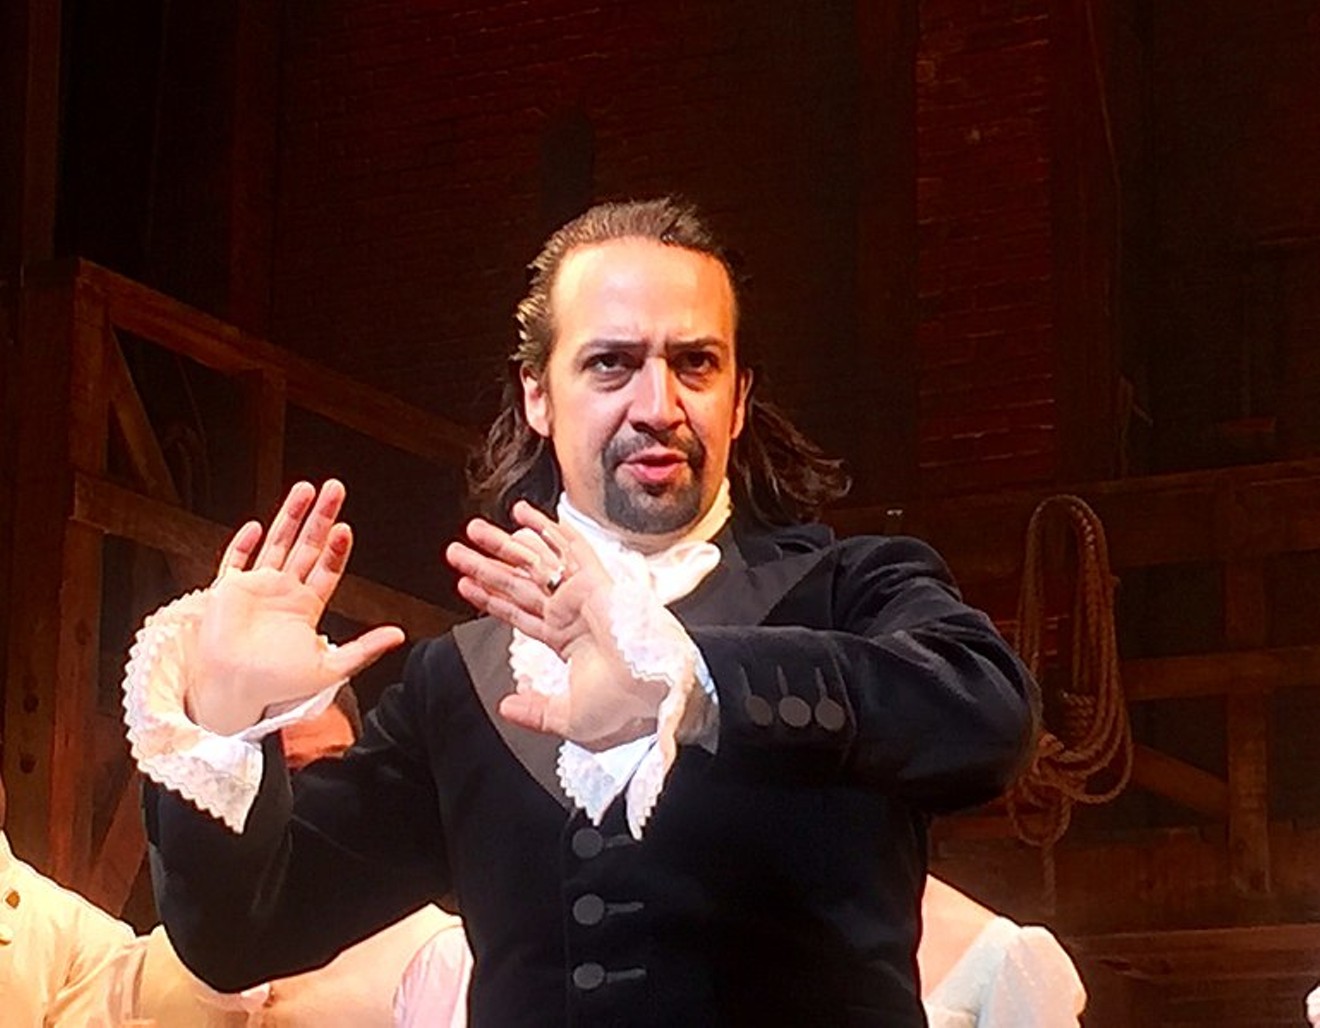 Don't throw away your shot to see Hamilton in Dallas.